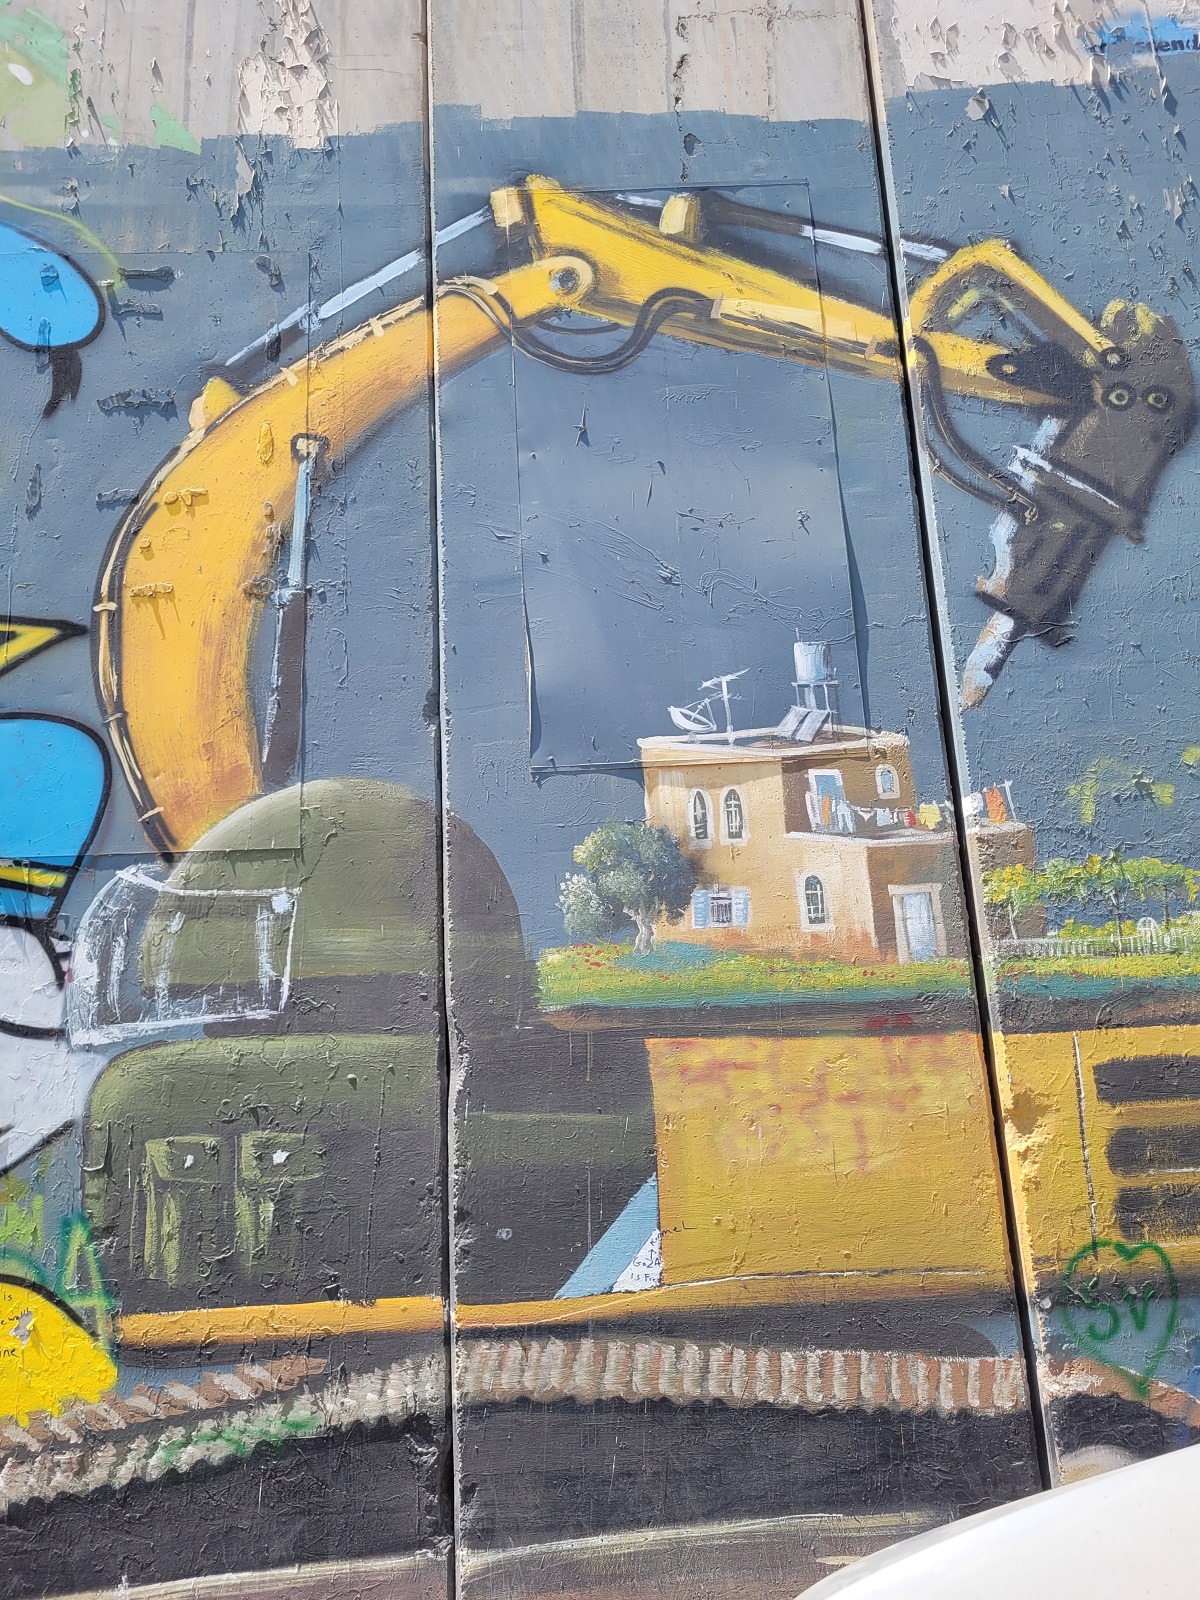 Graffiti mural of the crane Israel uses to demolish Palestinian houses, on a section of the separation wall, Bethlehem